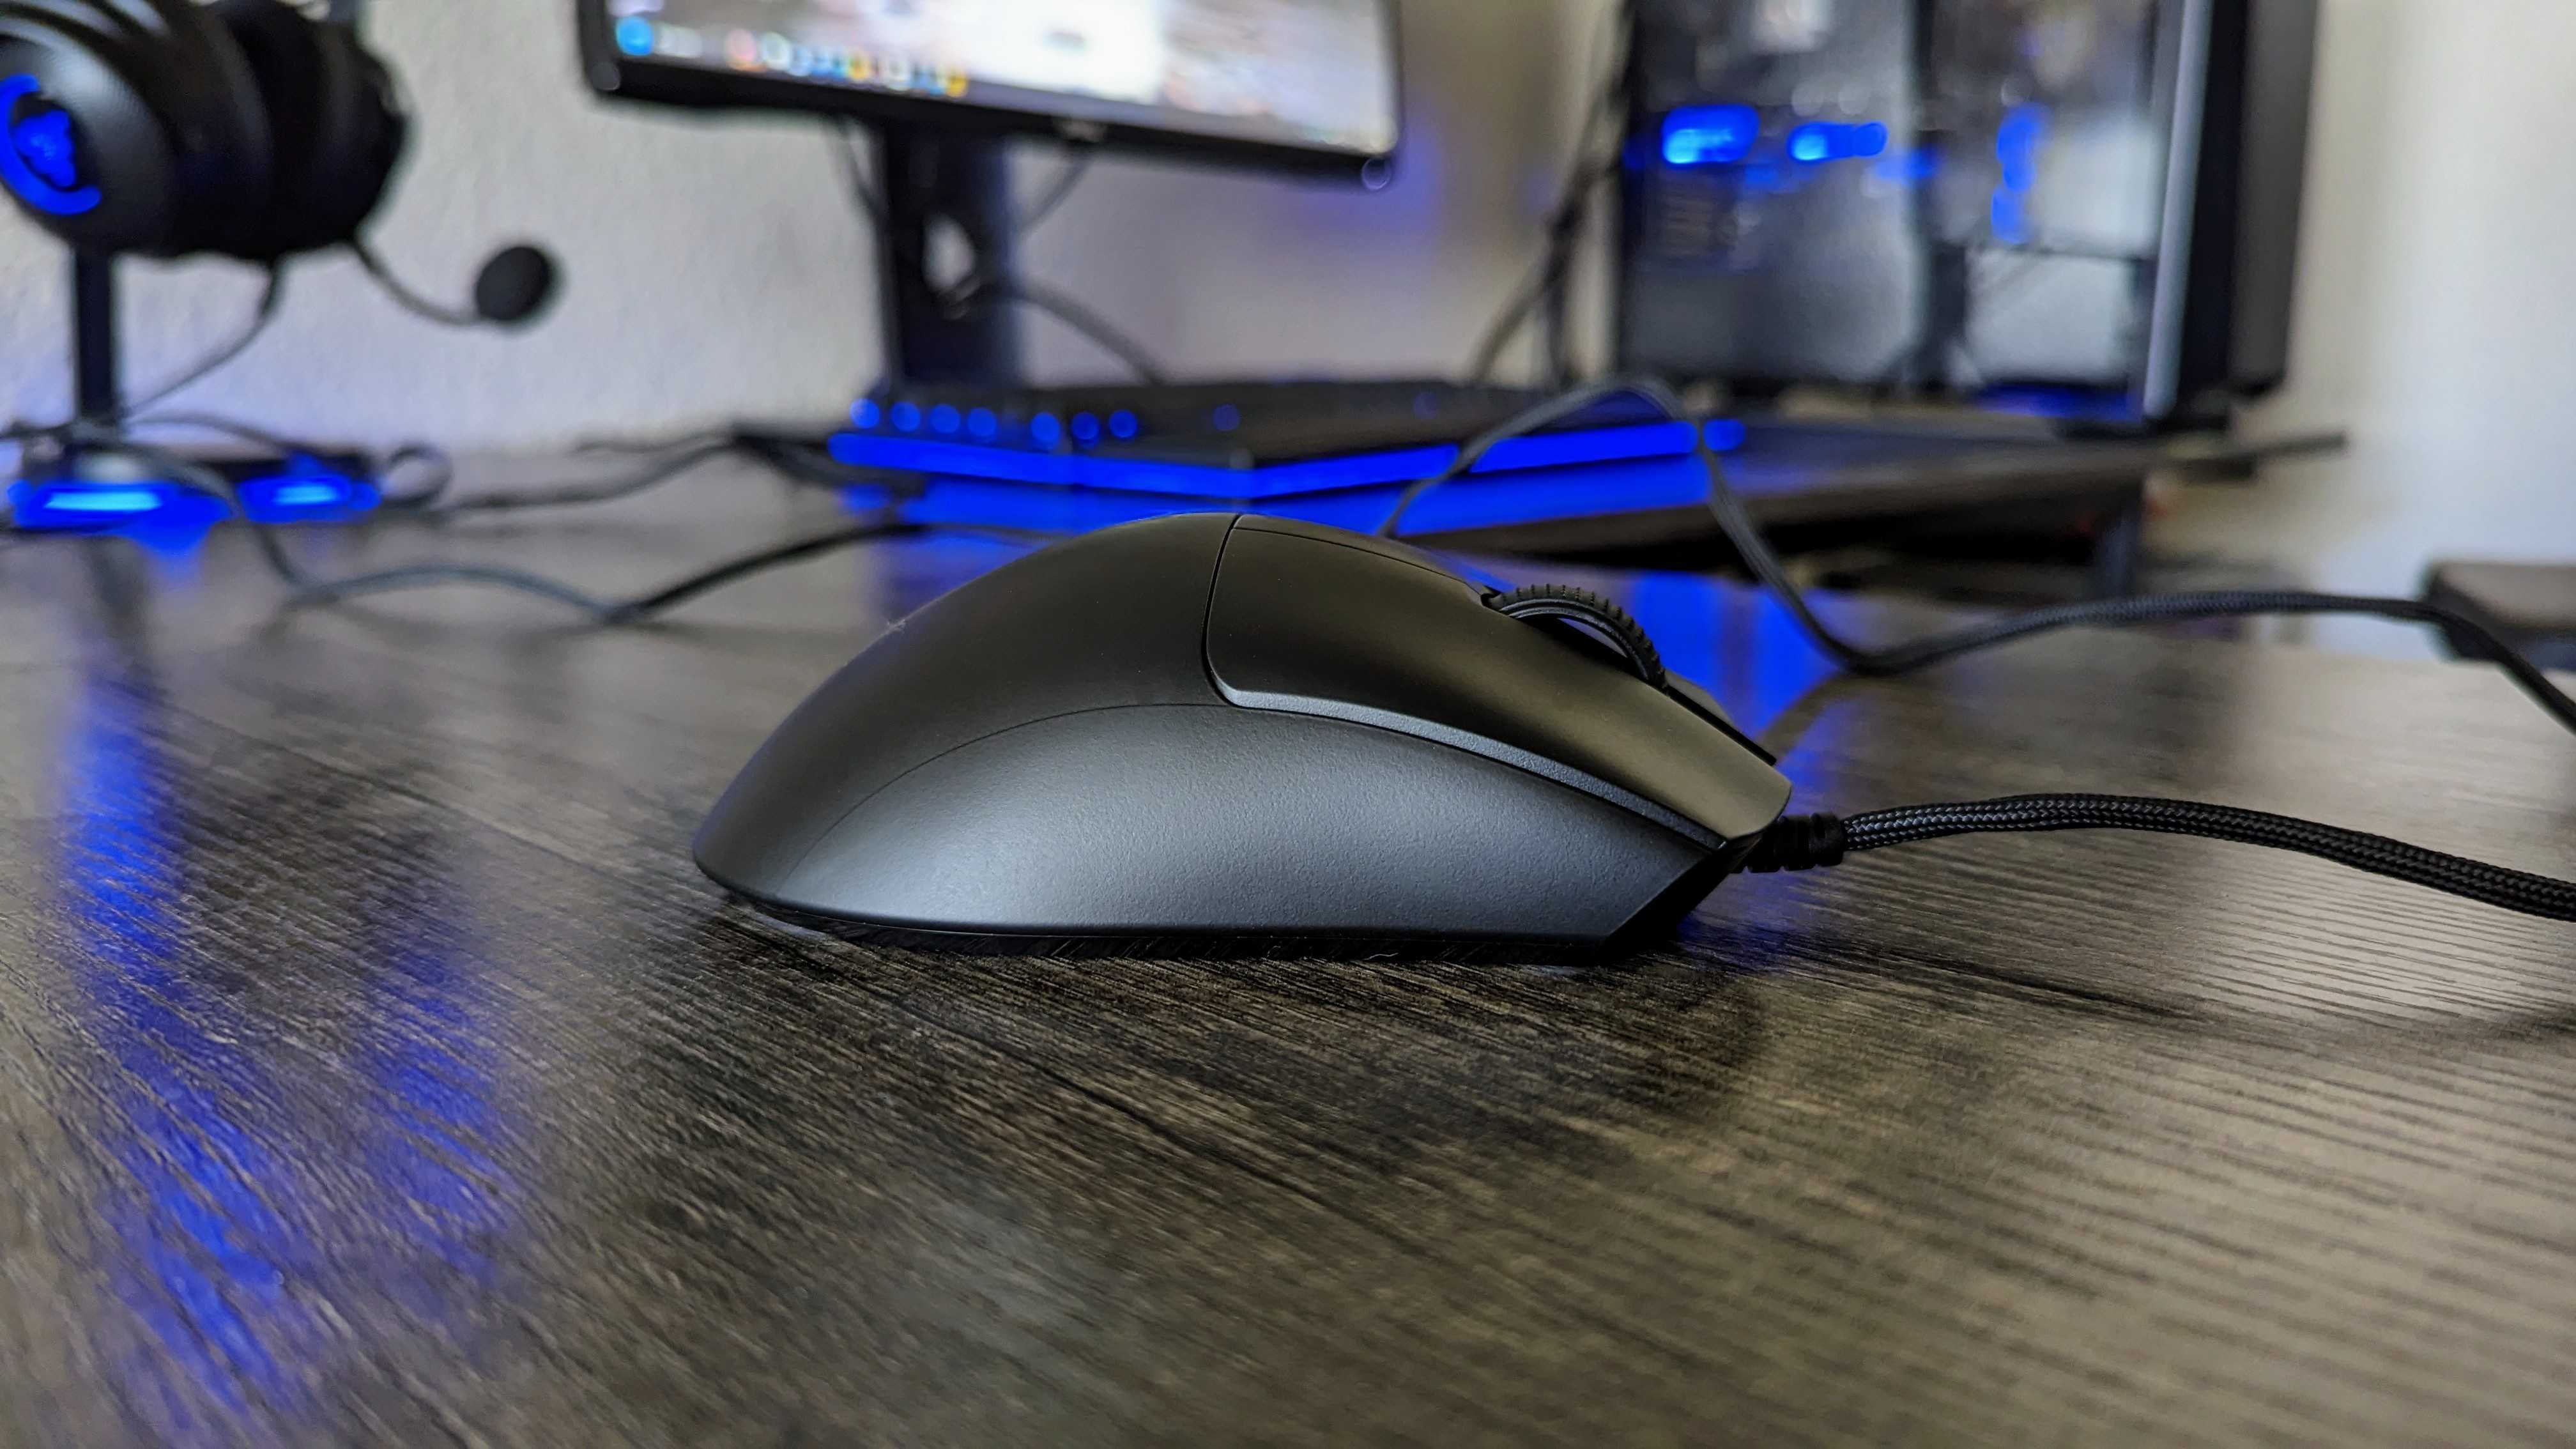 The Razer DeathAdder V3 on a desk, seen from the side.